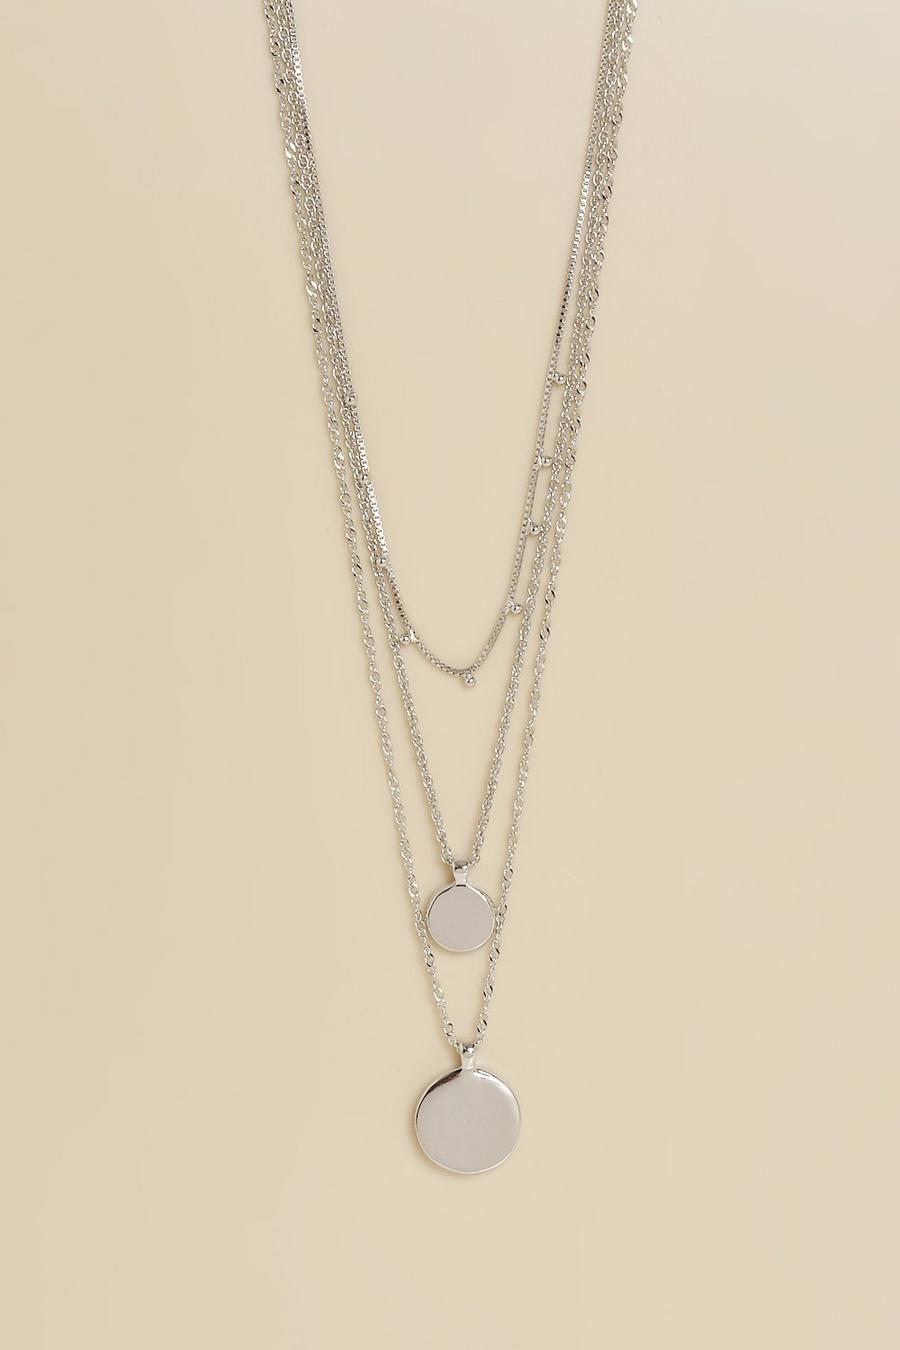 Silver Double Pendant Layered Necklace